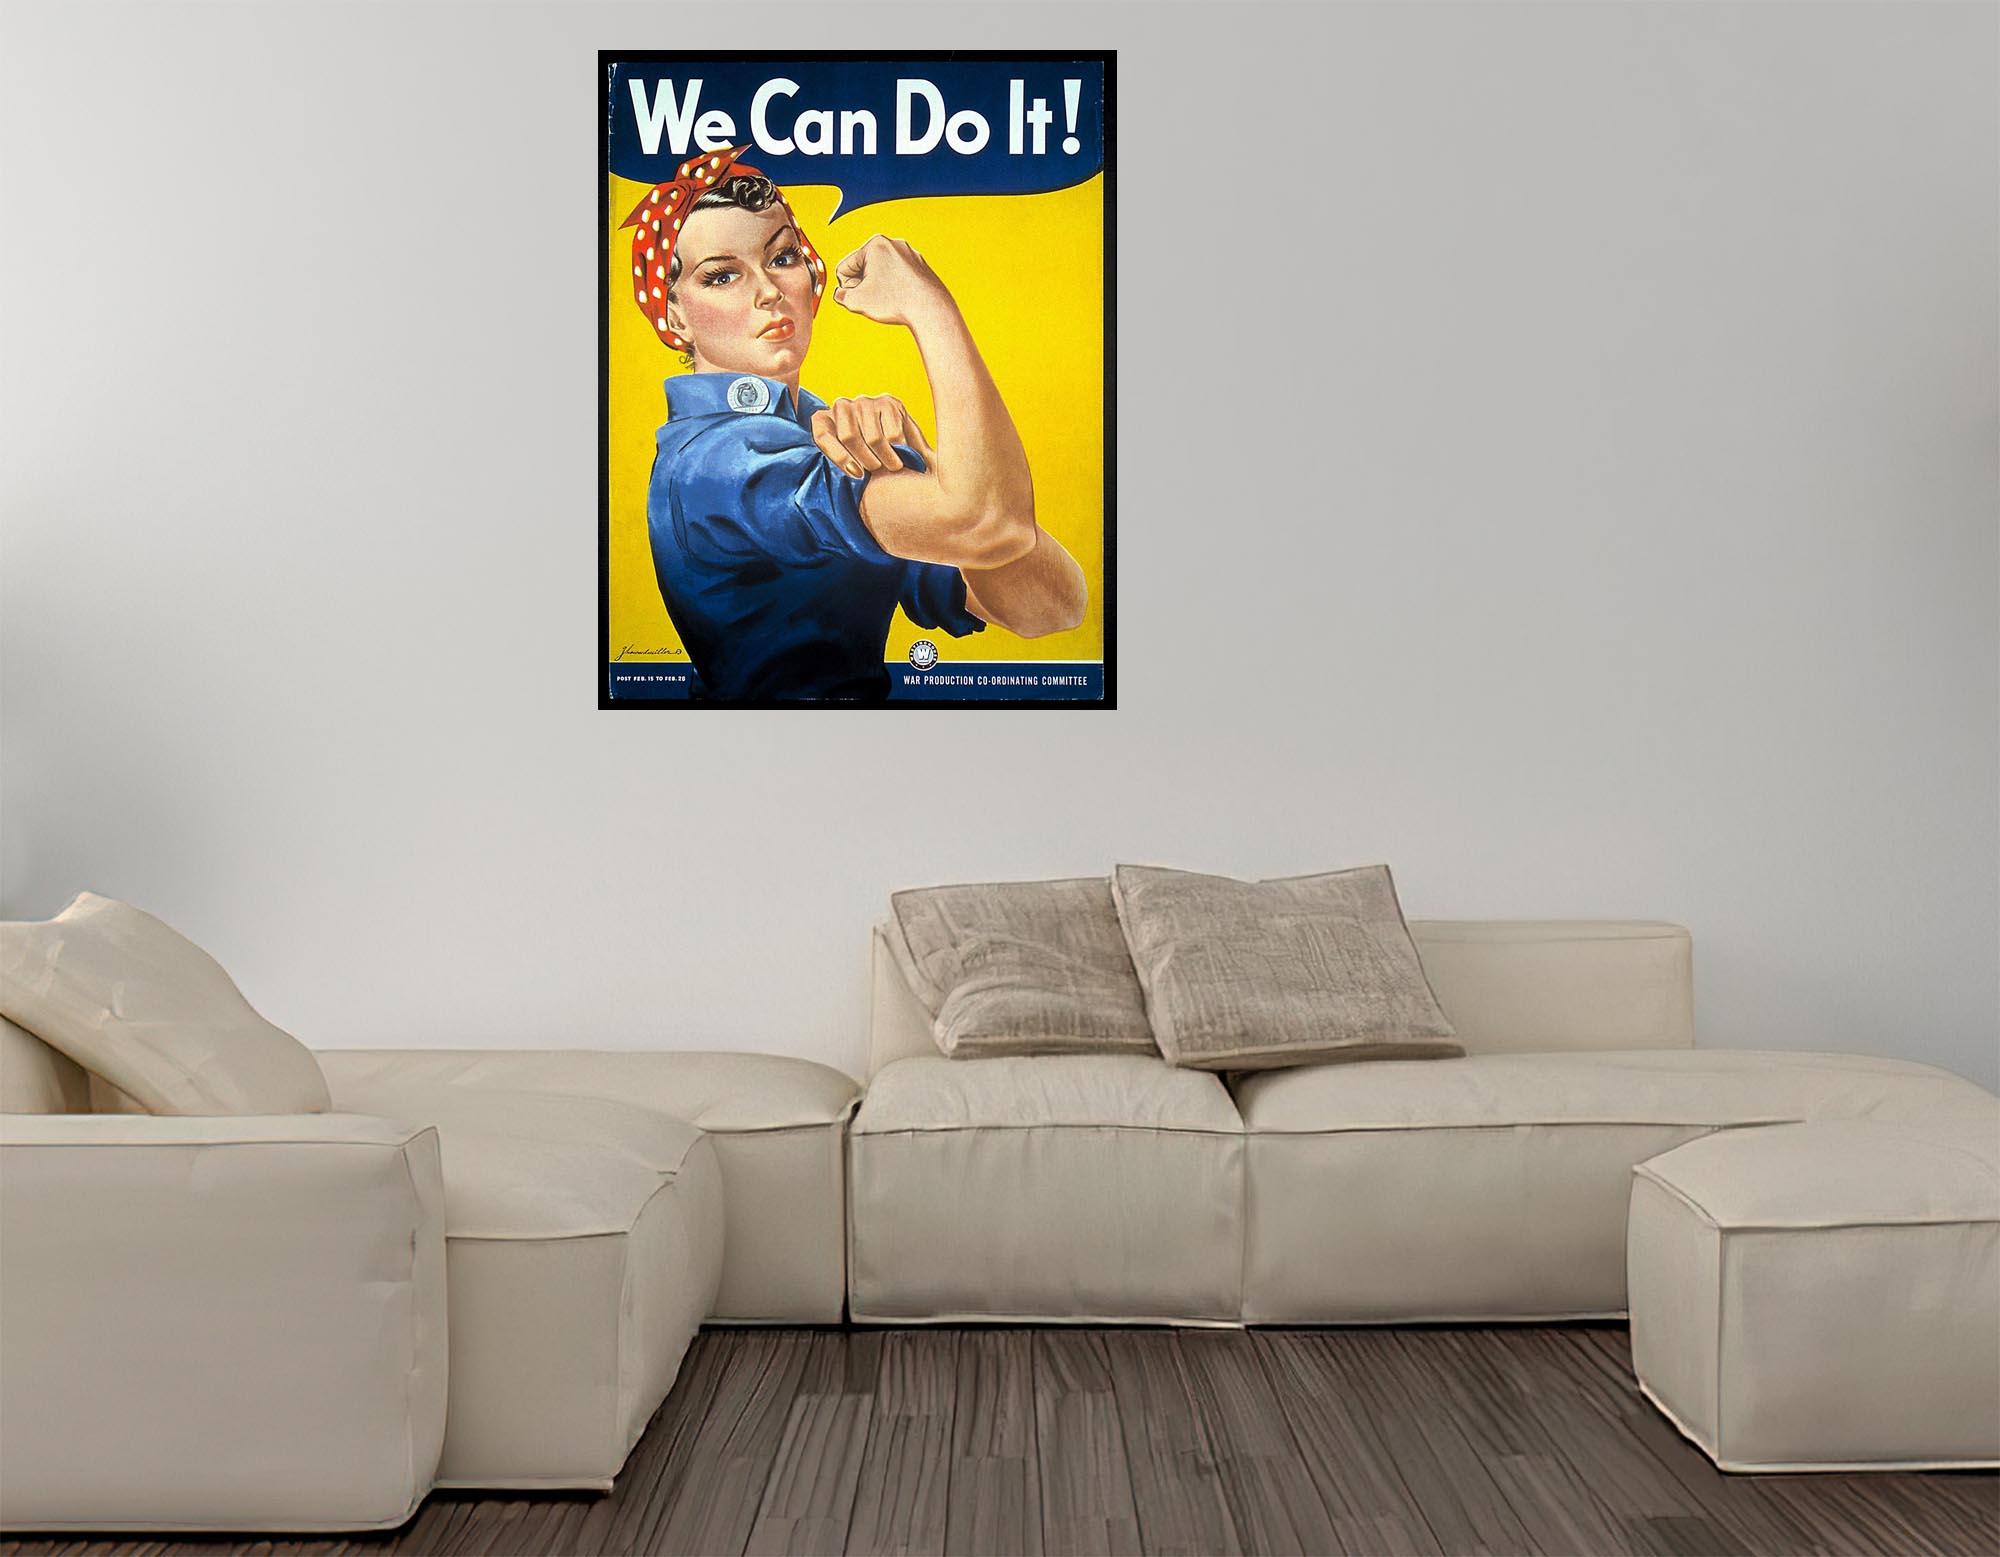 CoolWalls.ca Posters, Prints, & Visual Artwork War Advert Rosie Riveter WW2 We Can Do It Women USA Artwork: Peel_n_Stick onto the wall, wallpaper like fabric